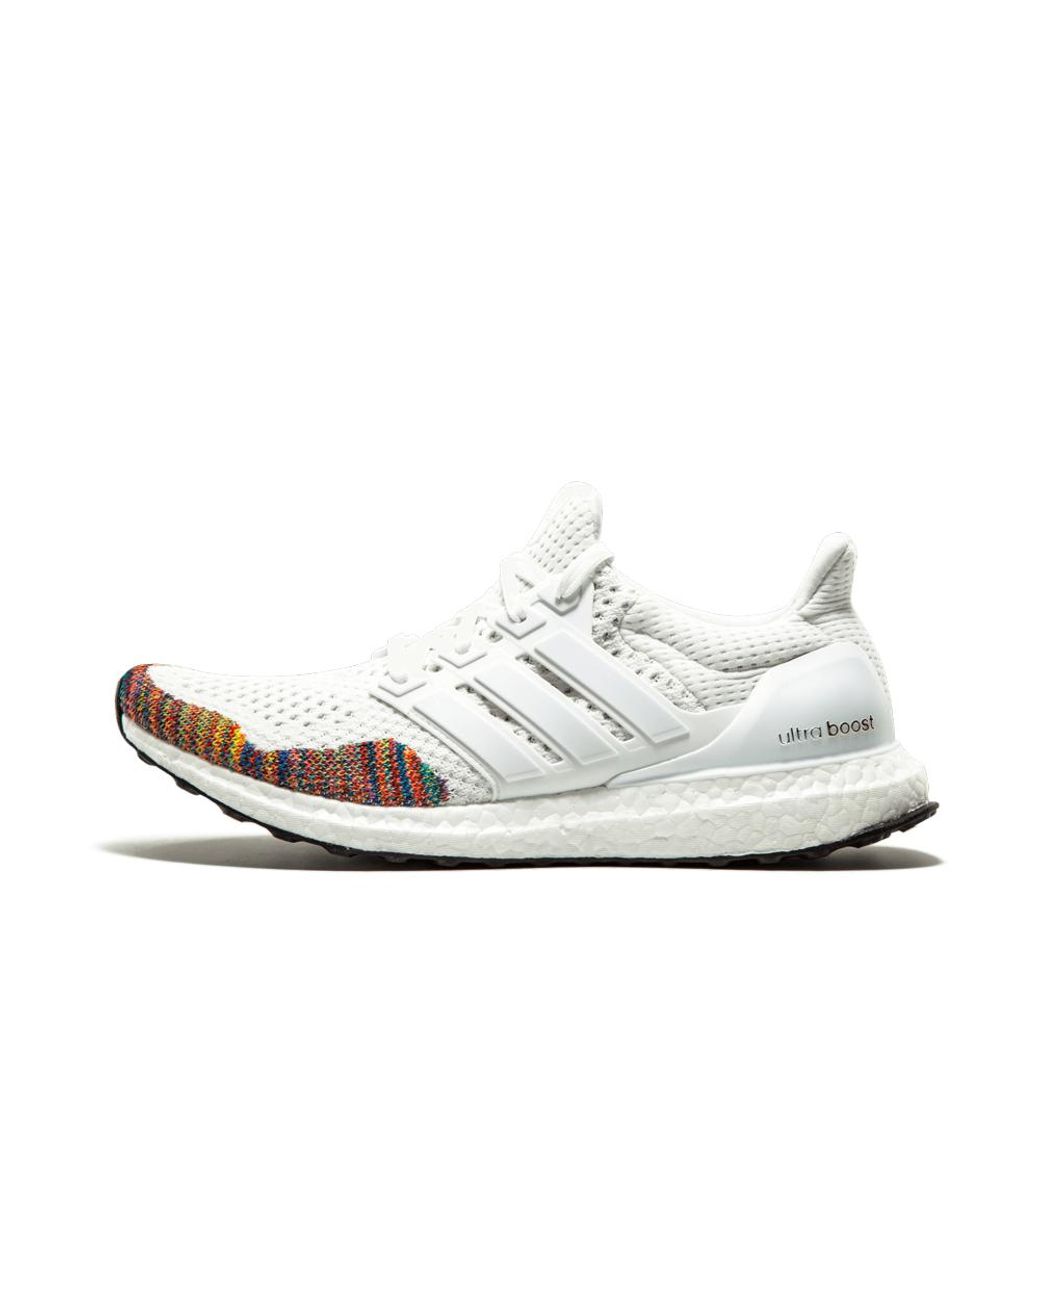 ultra boost size 8.5 mens